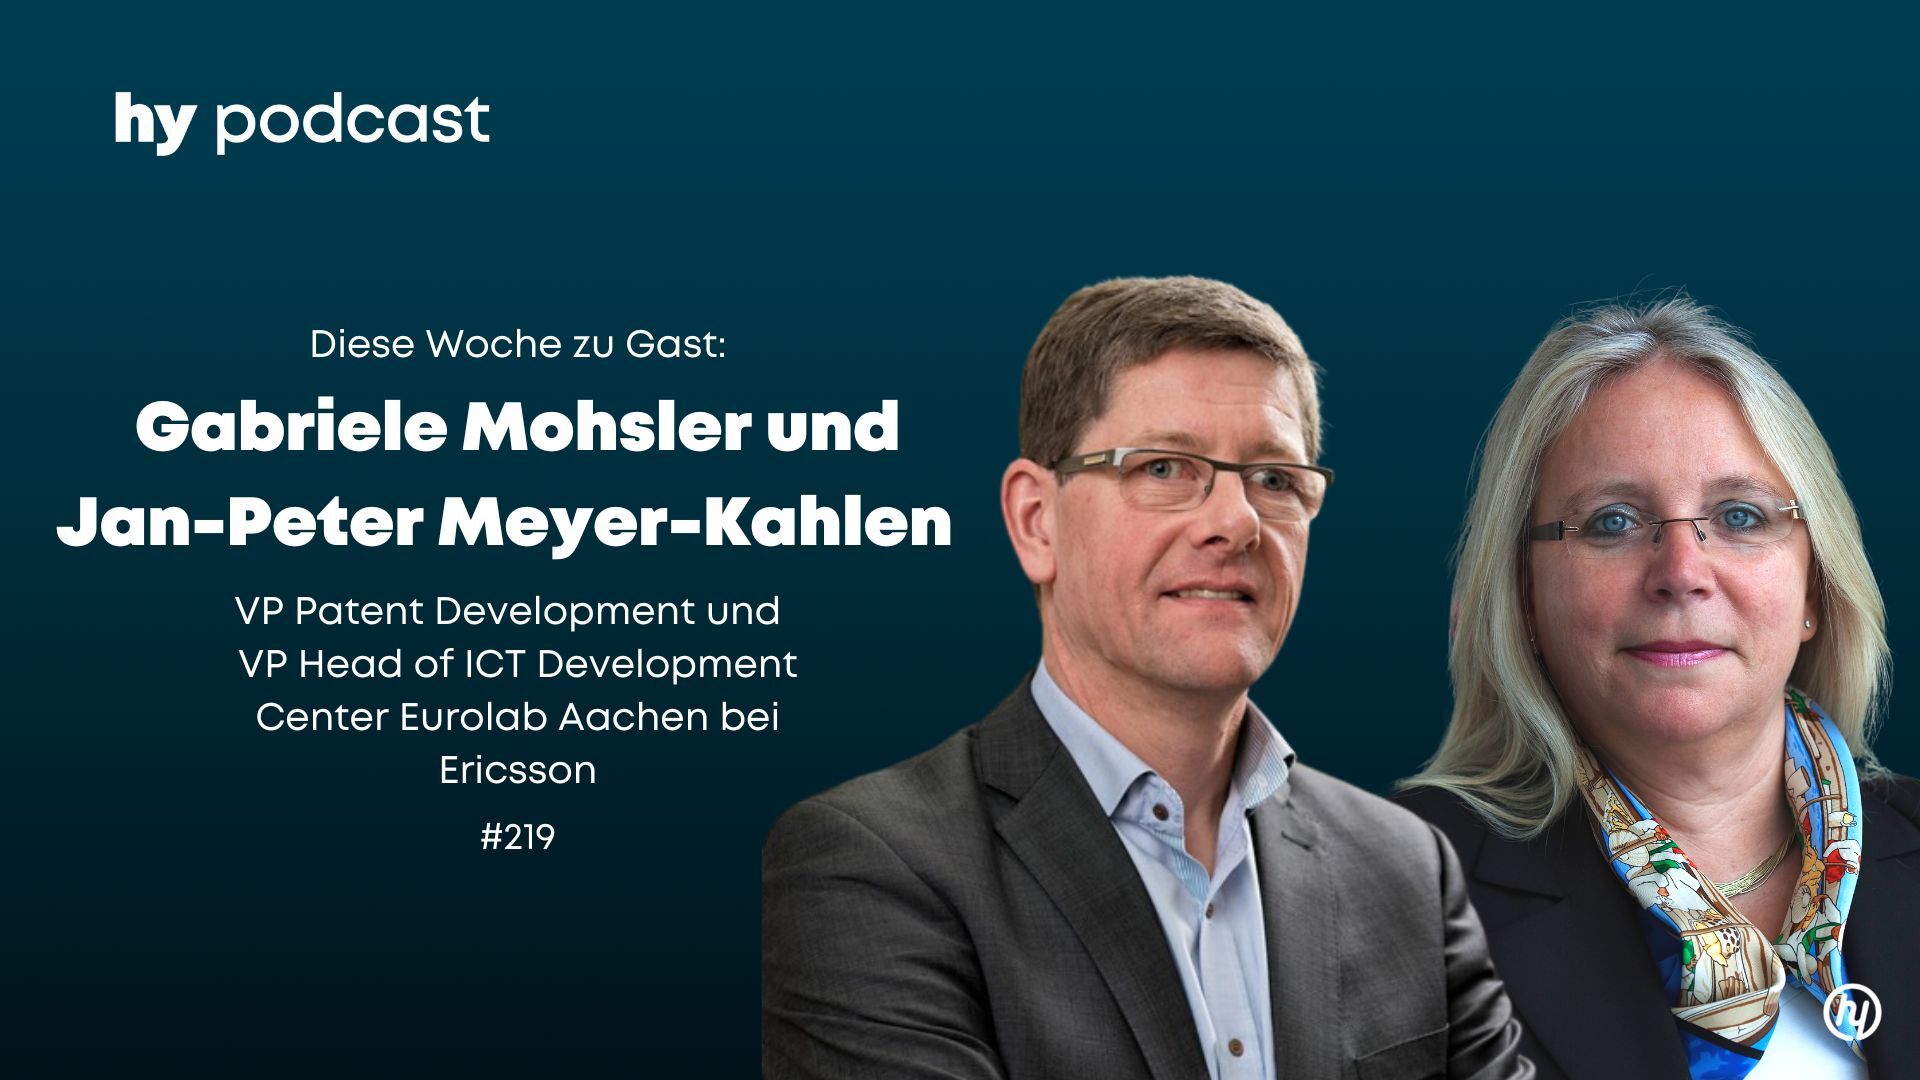 Ericsson's hy podcast episode with Gabriele Mohsler and Jan-Peter Meyer-Kahlen on 5G